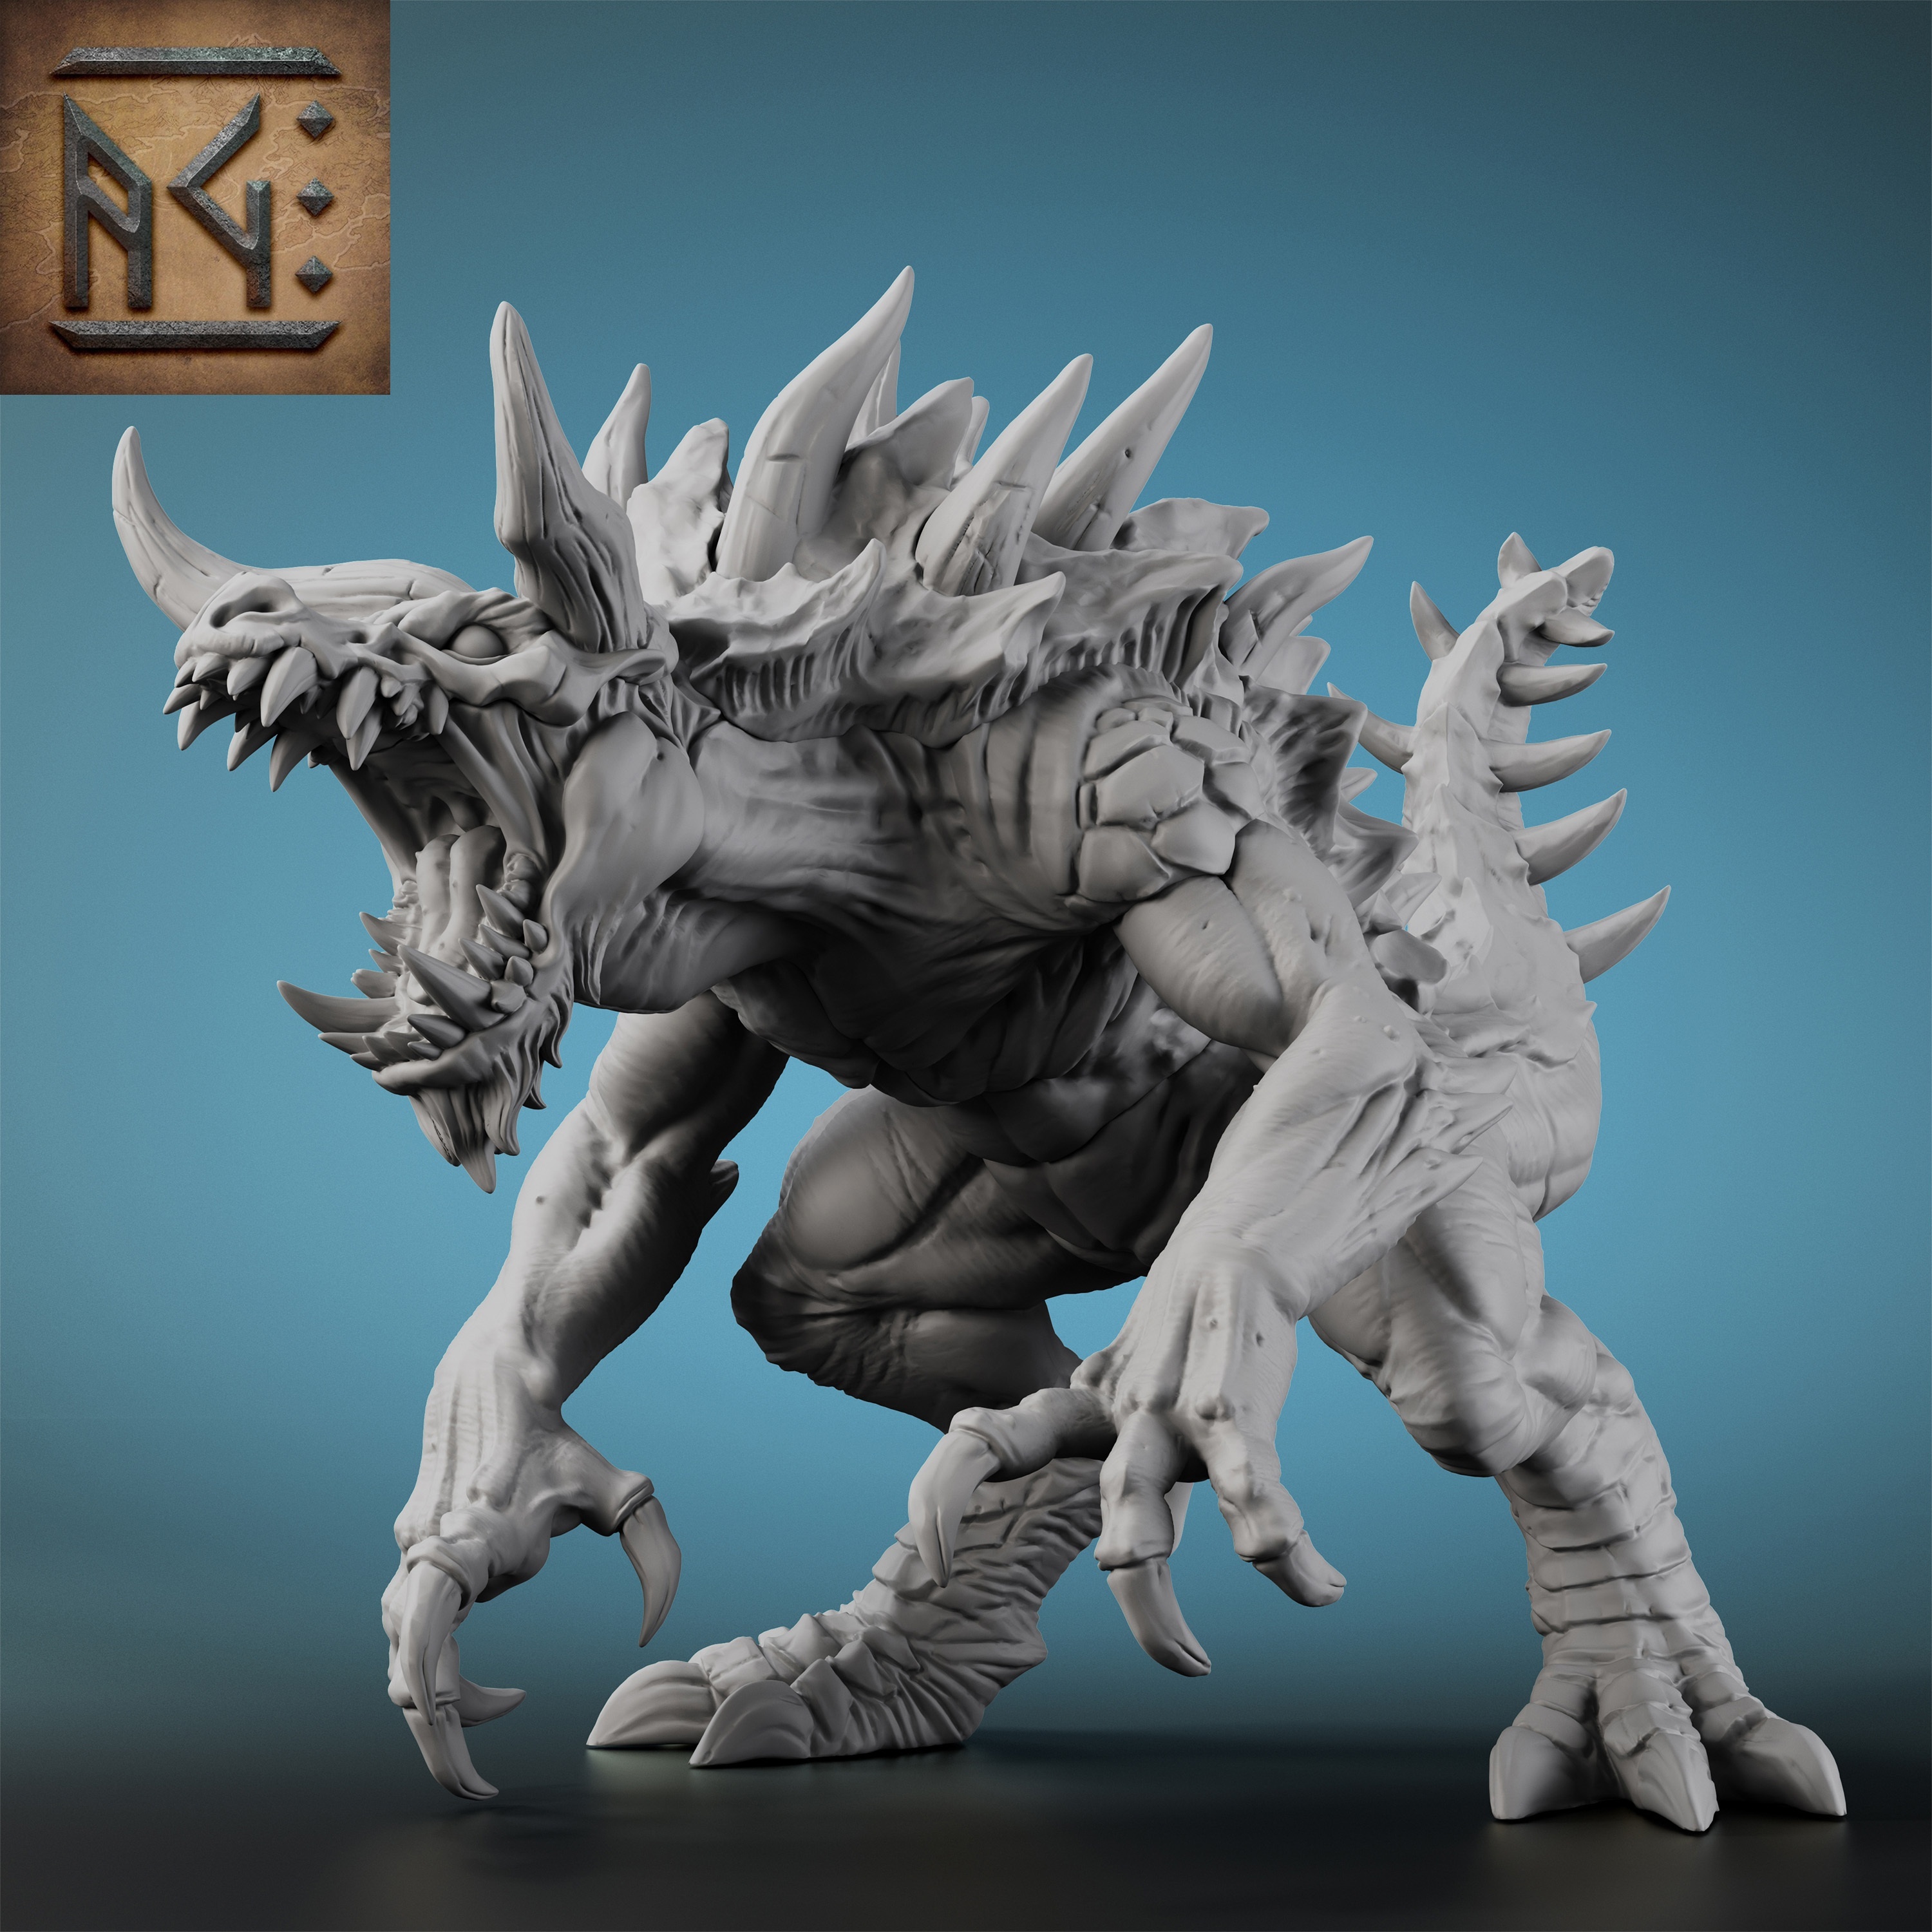 

Monster Miniature Tarrasque 3d Printed Fantasy Tabletop Miniatures For Role Playing Minaitures Board Game